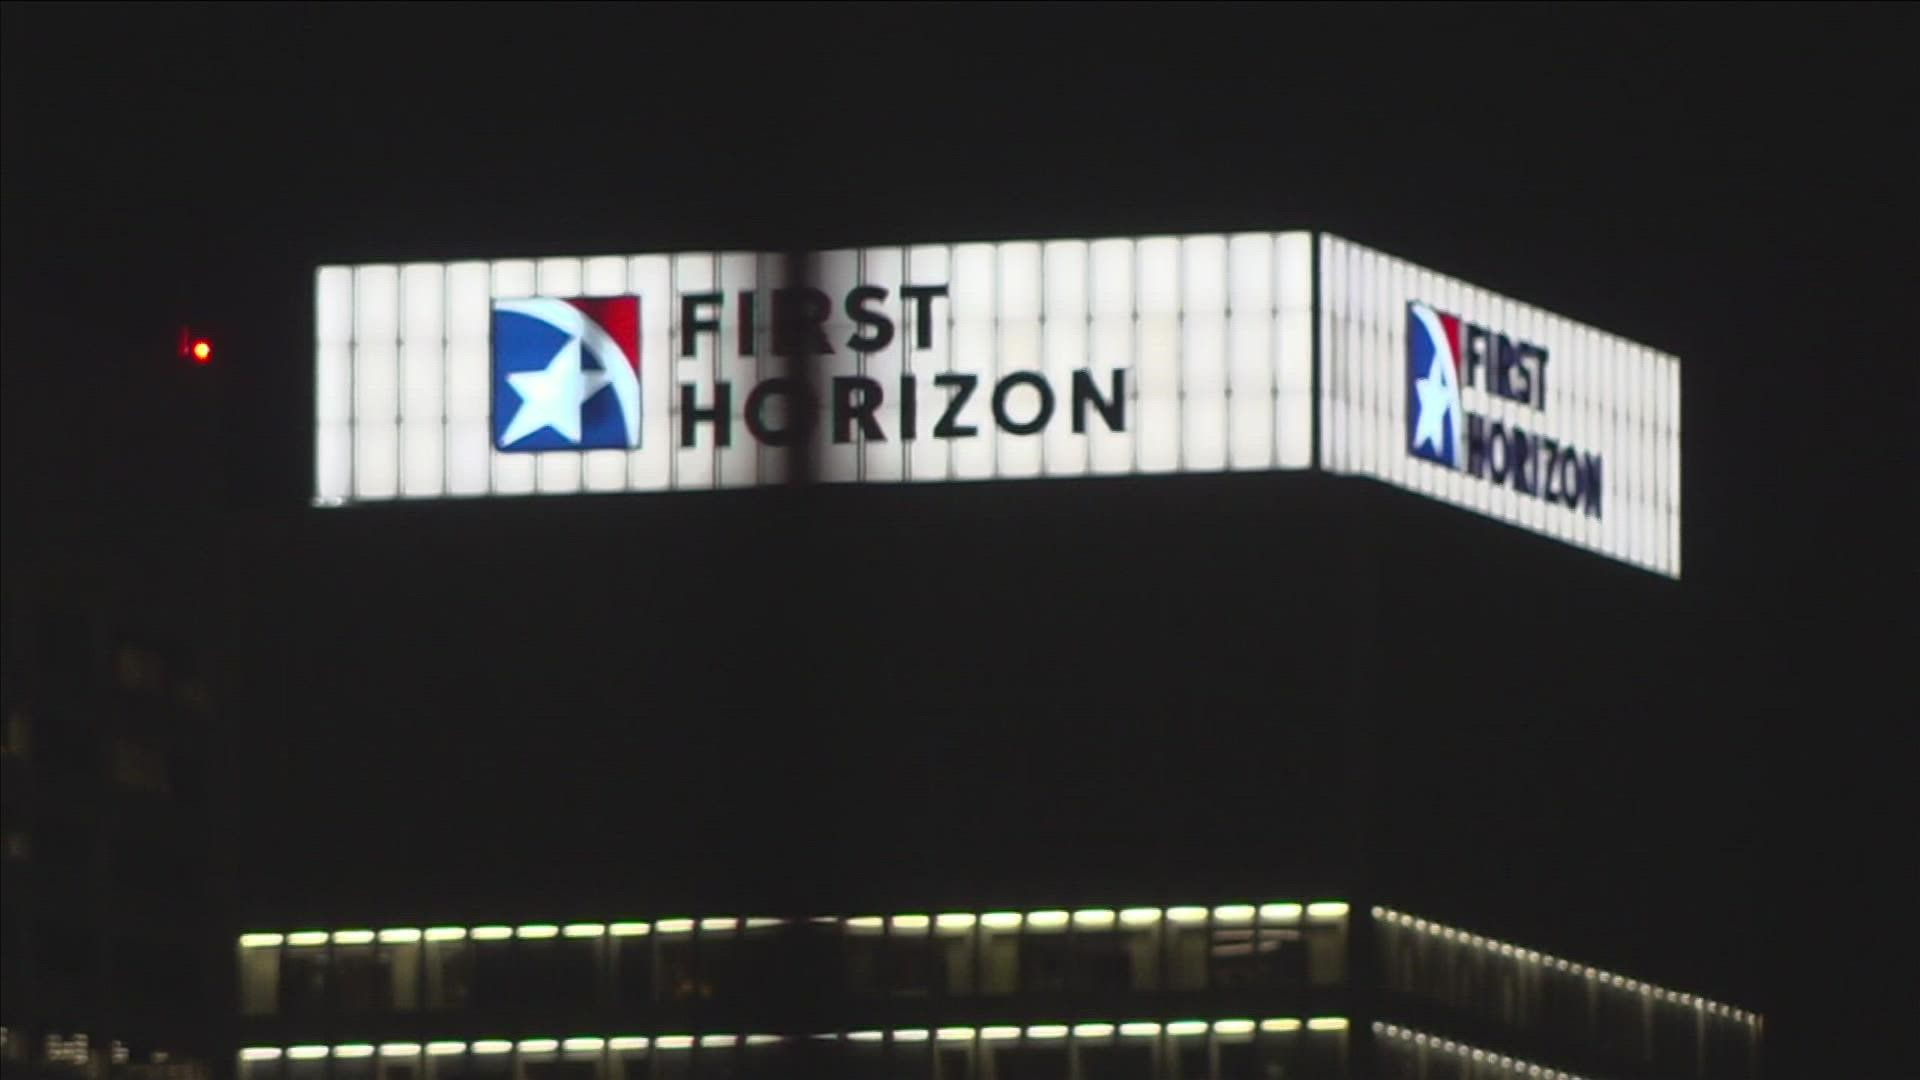 Richard Ransom said thousands of Memphis-based First Horizon employees and dozens of nonprofits can't help but be a bit worried Monday night.